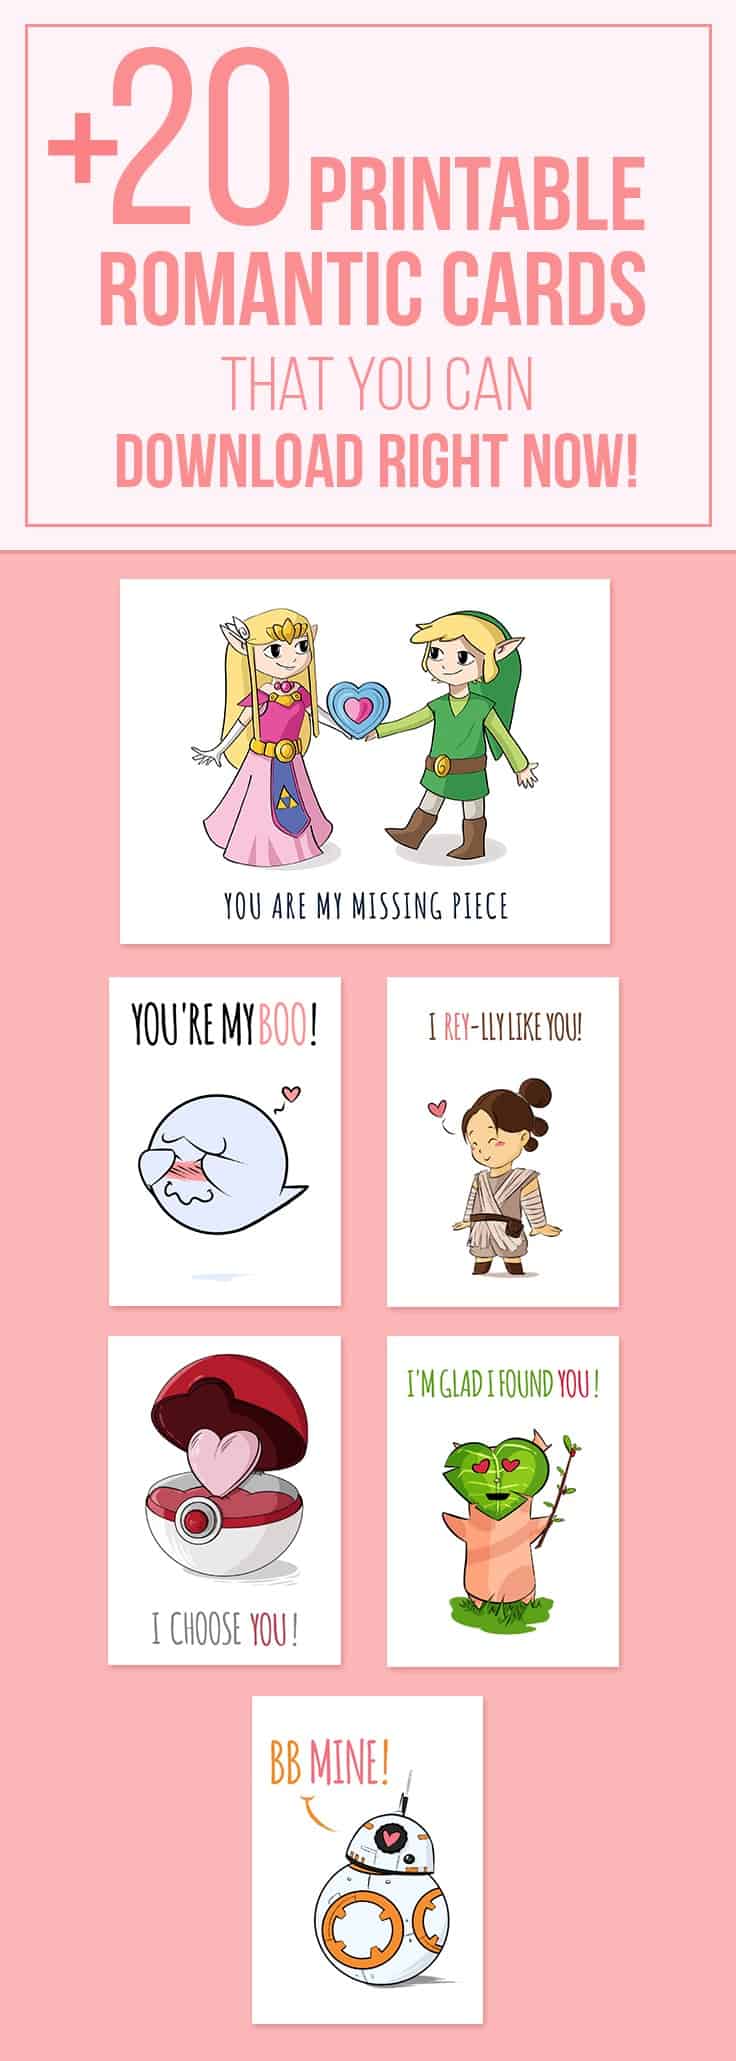 20+ Printable Valentine Cards that you can Download Right Now! by Don Corgi on Etsy